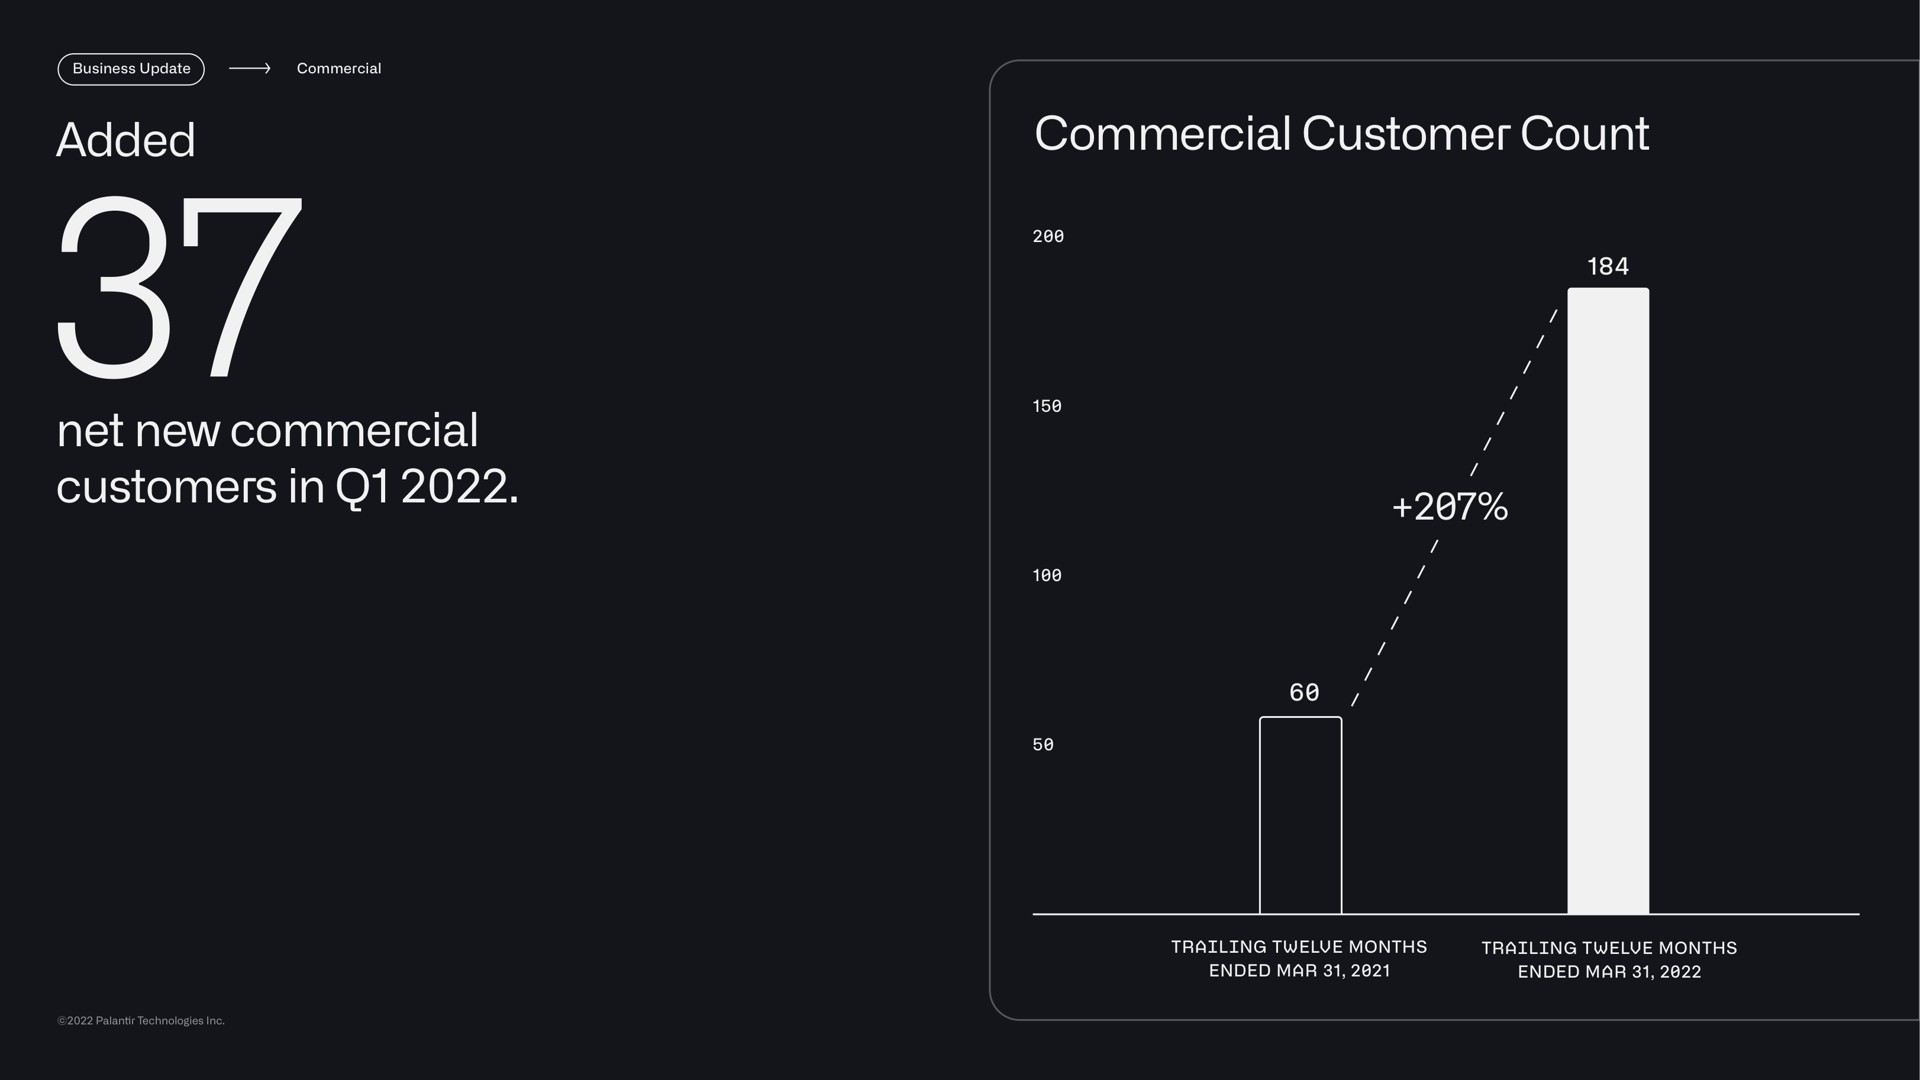 added net new commercial customers in commercial customer count | Palantir